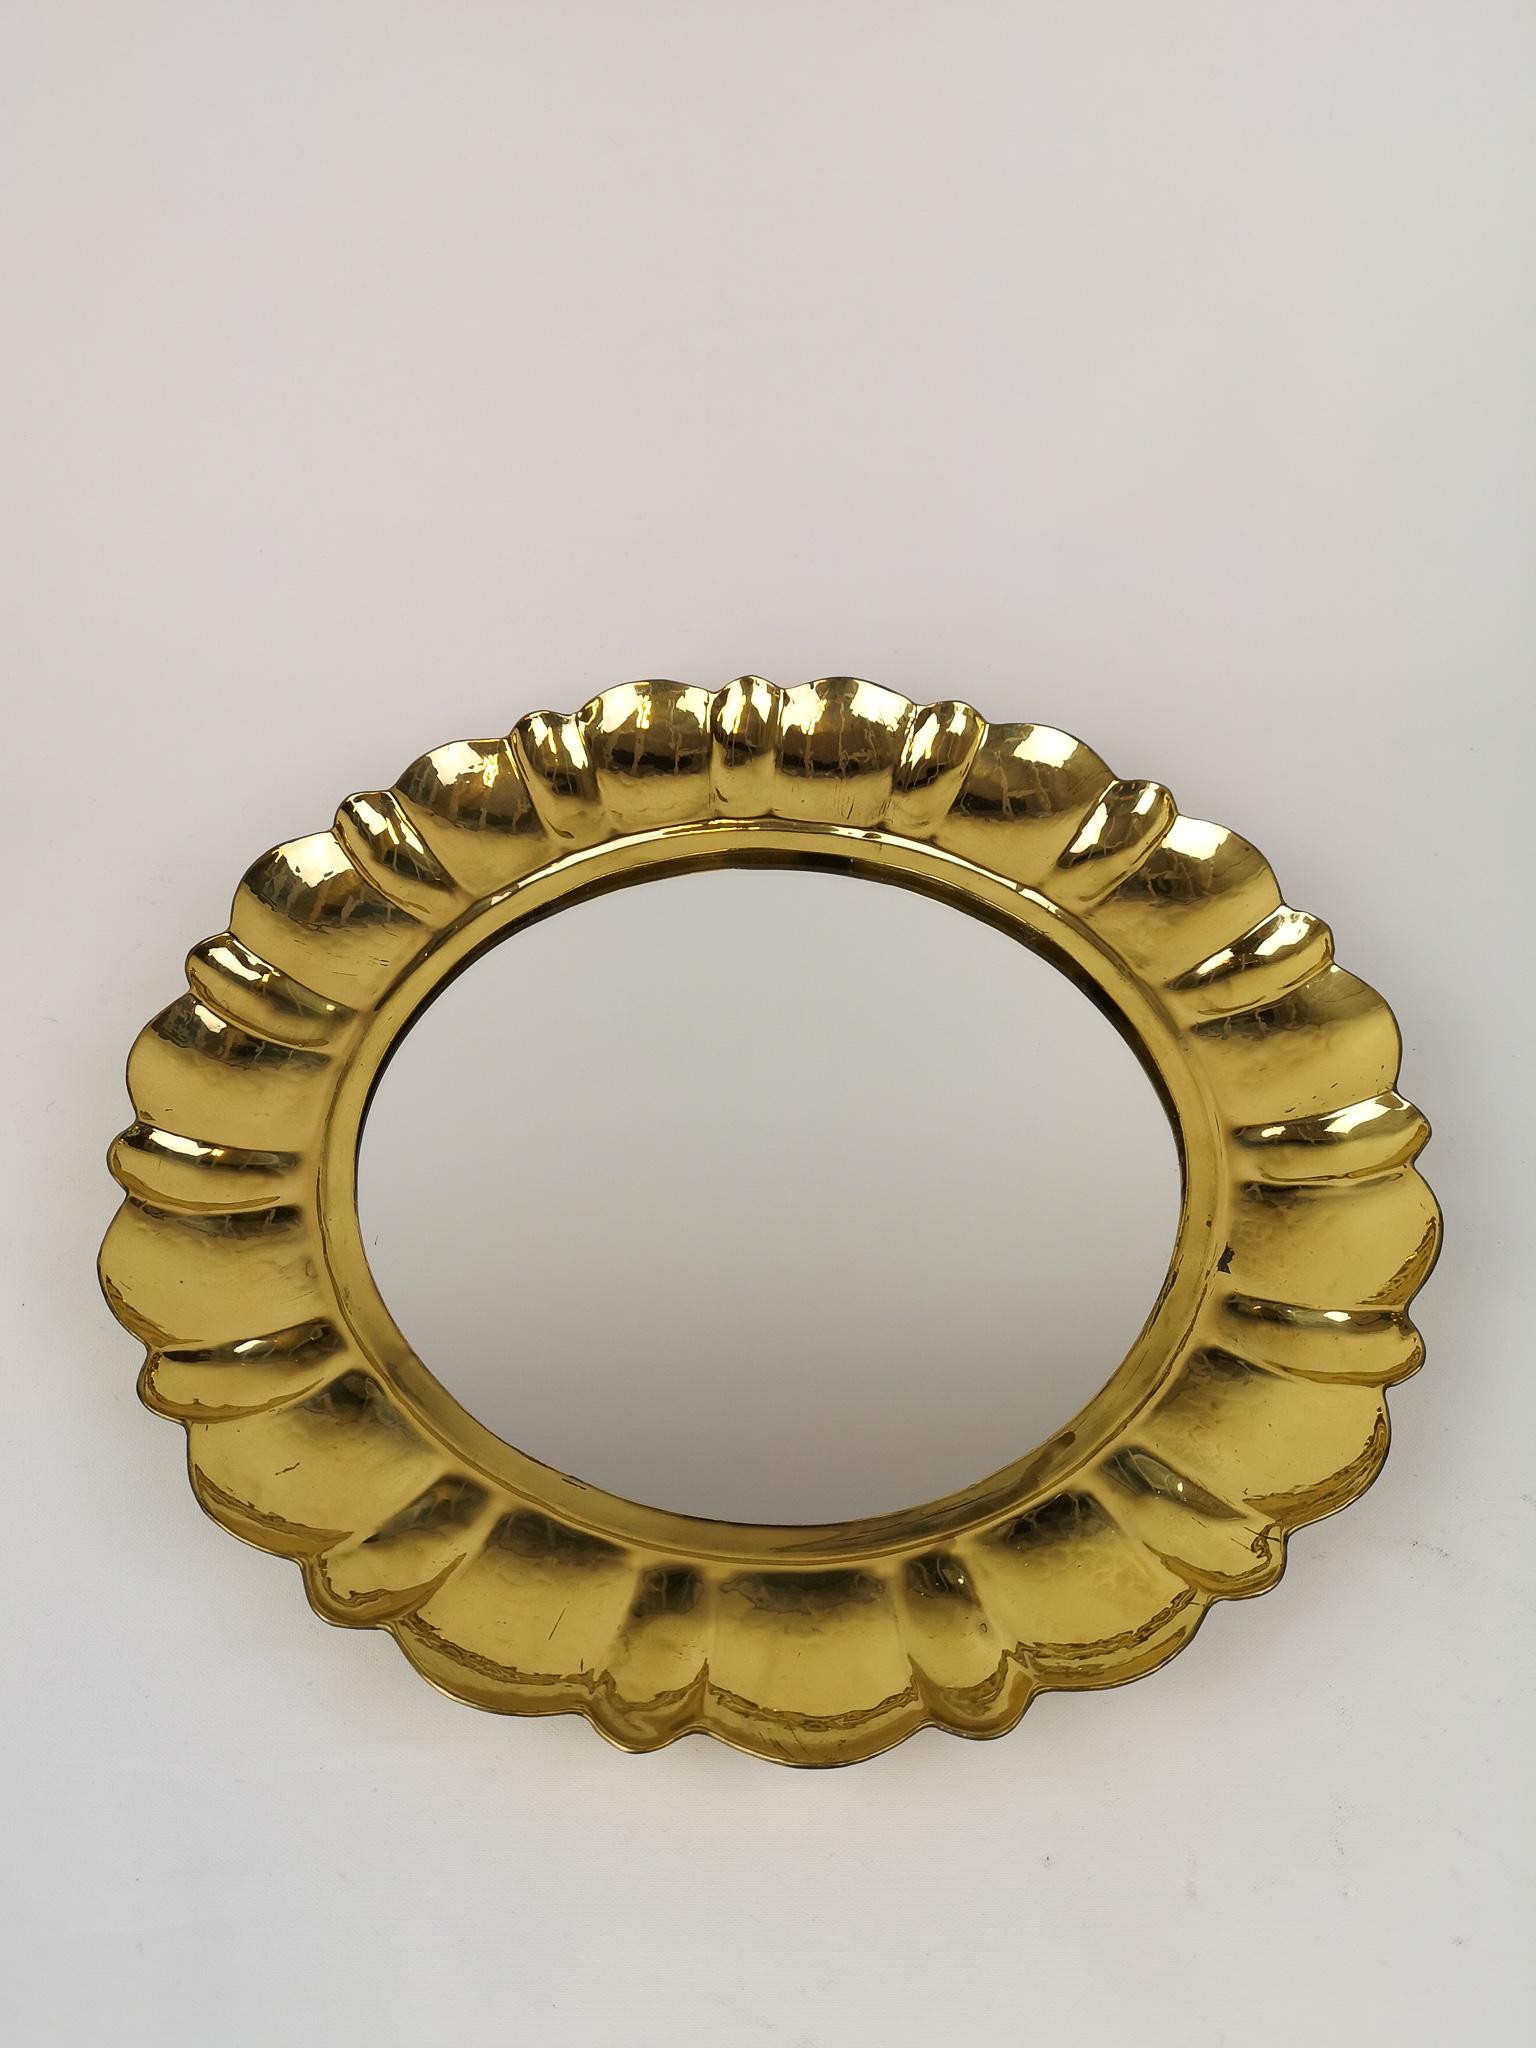 This handcrafted rare mirror made in solid brass was made in Arvika Sweden. The design is by Lars Holmström. The round brass mirror part has been carefully cut and into the brass part there has been placed a mirror. The mirror with its handcrafted